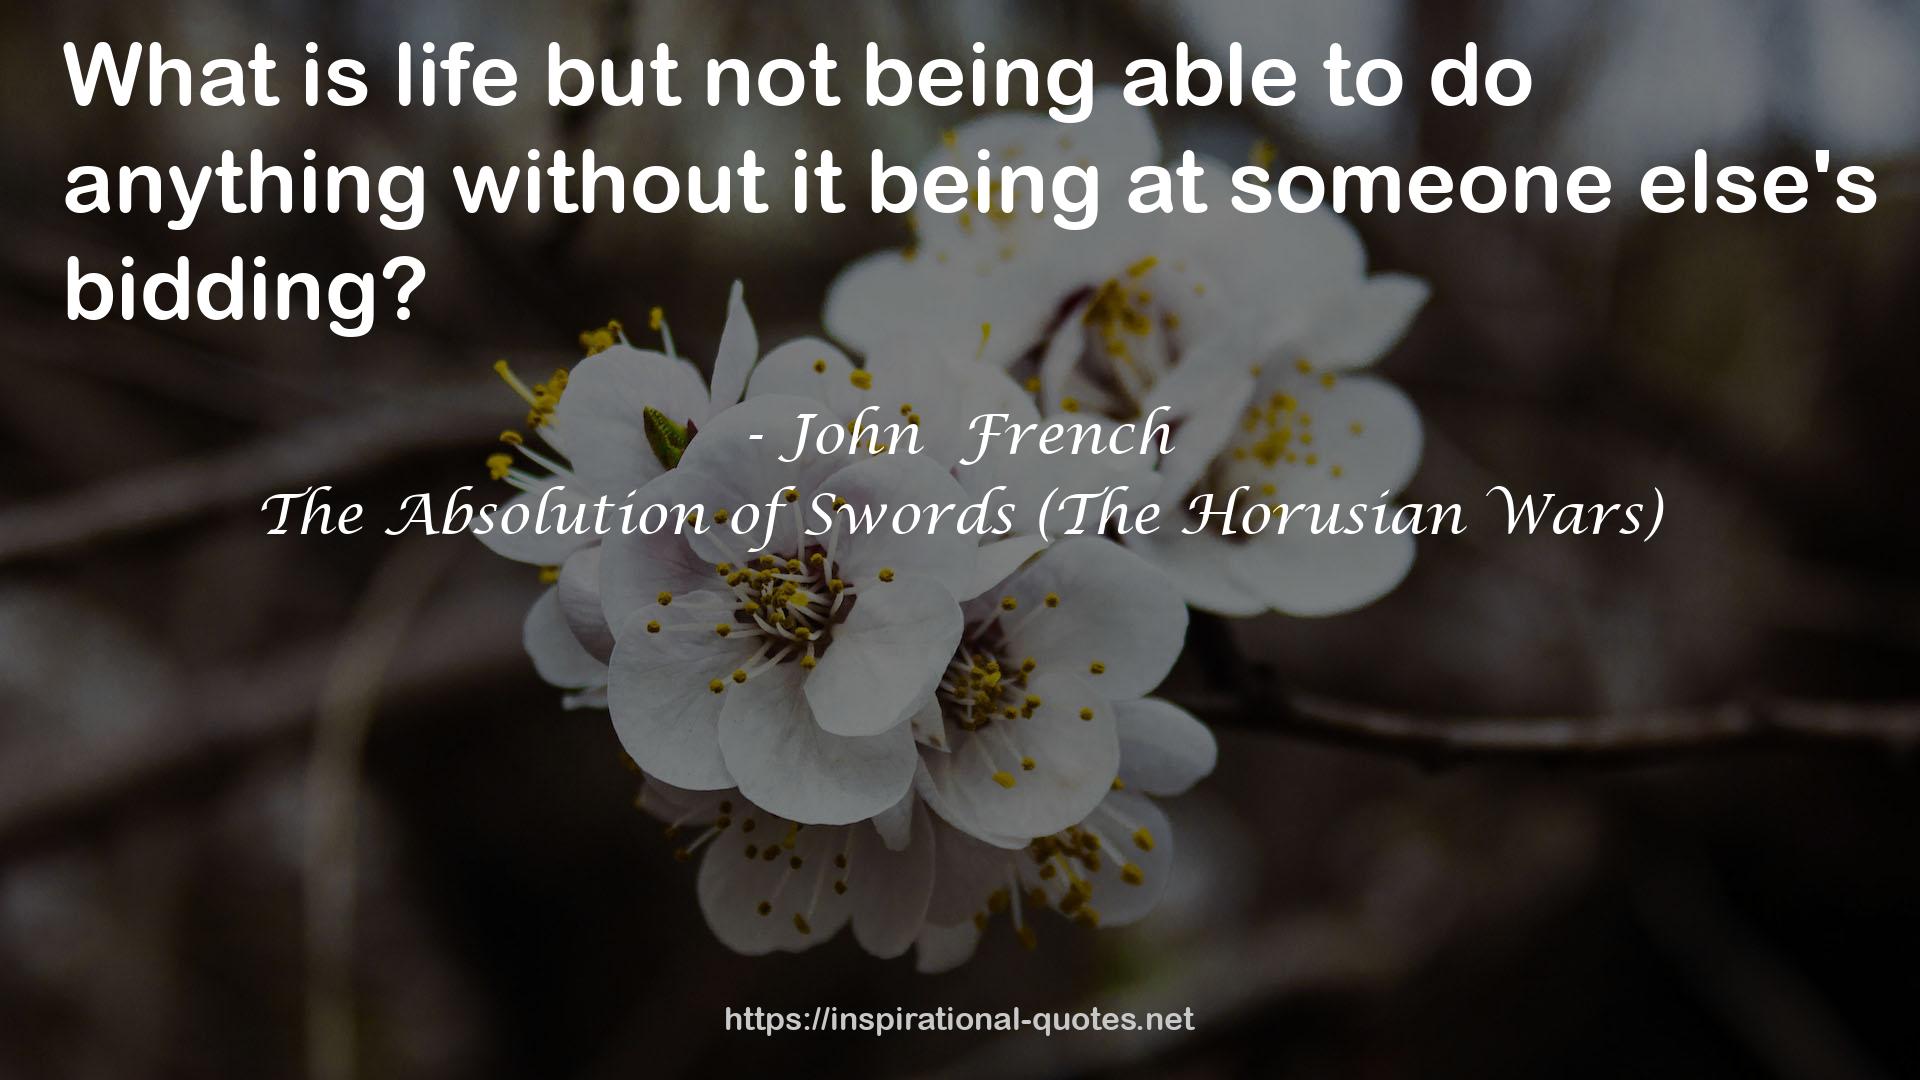 The Absolution of Swords (The Horusian Wars) QUOTES